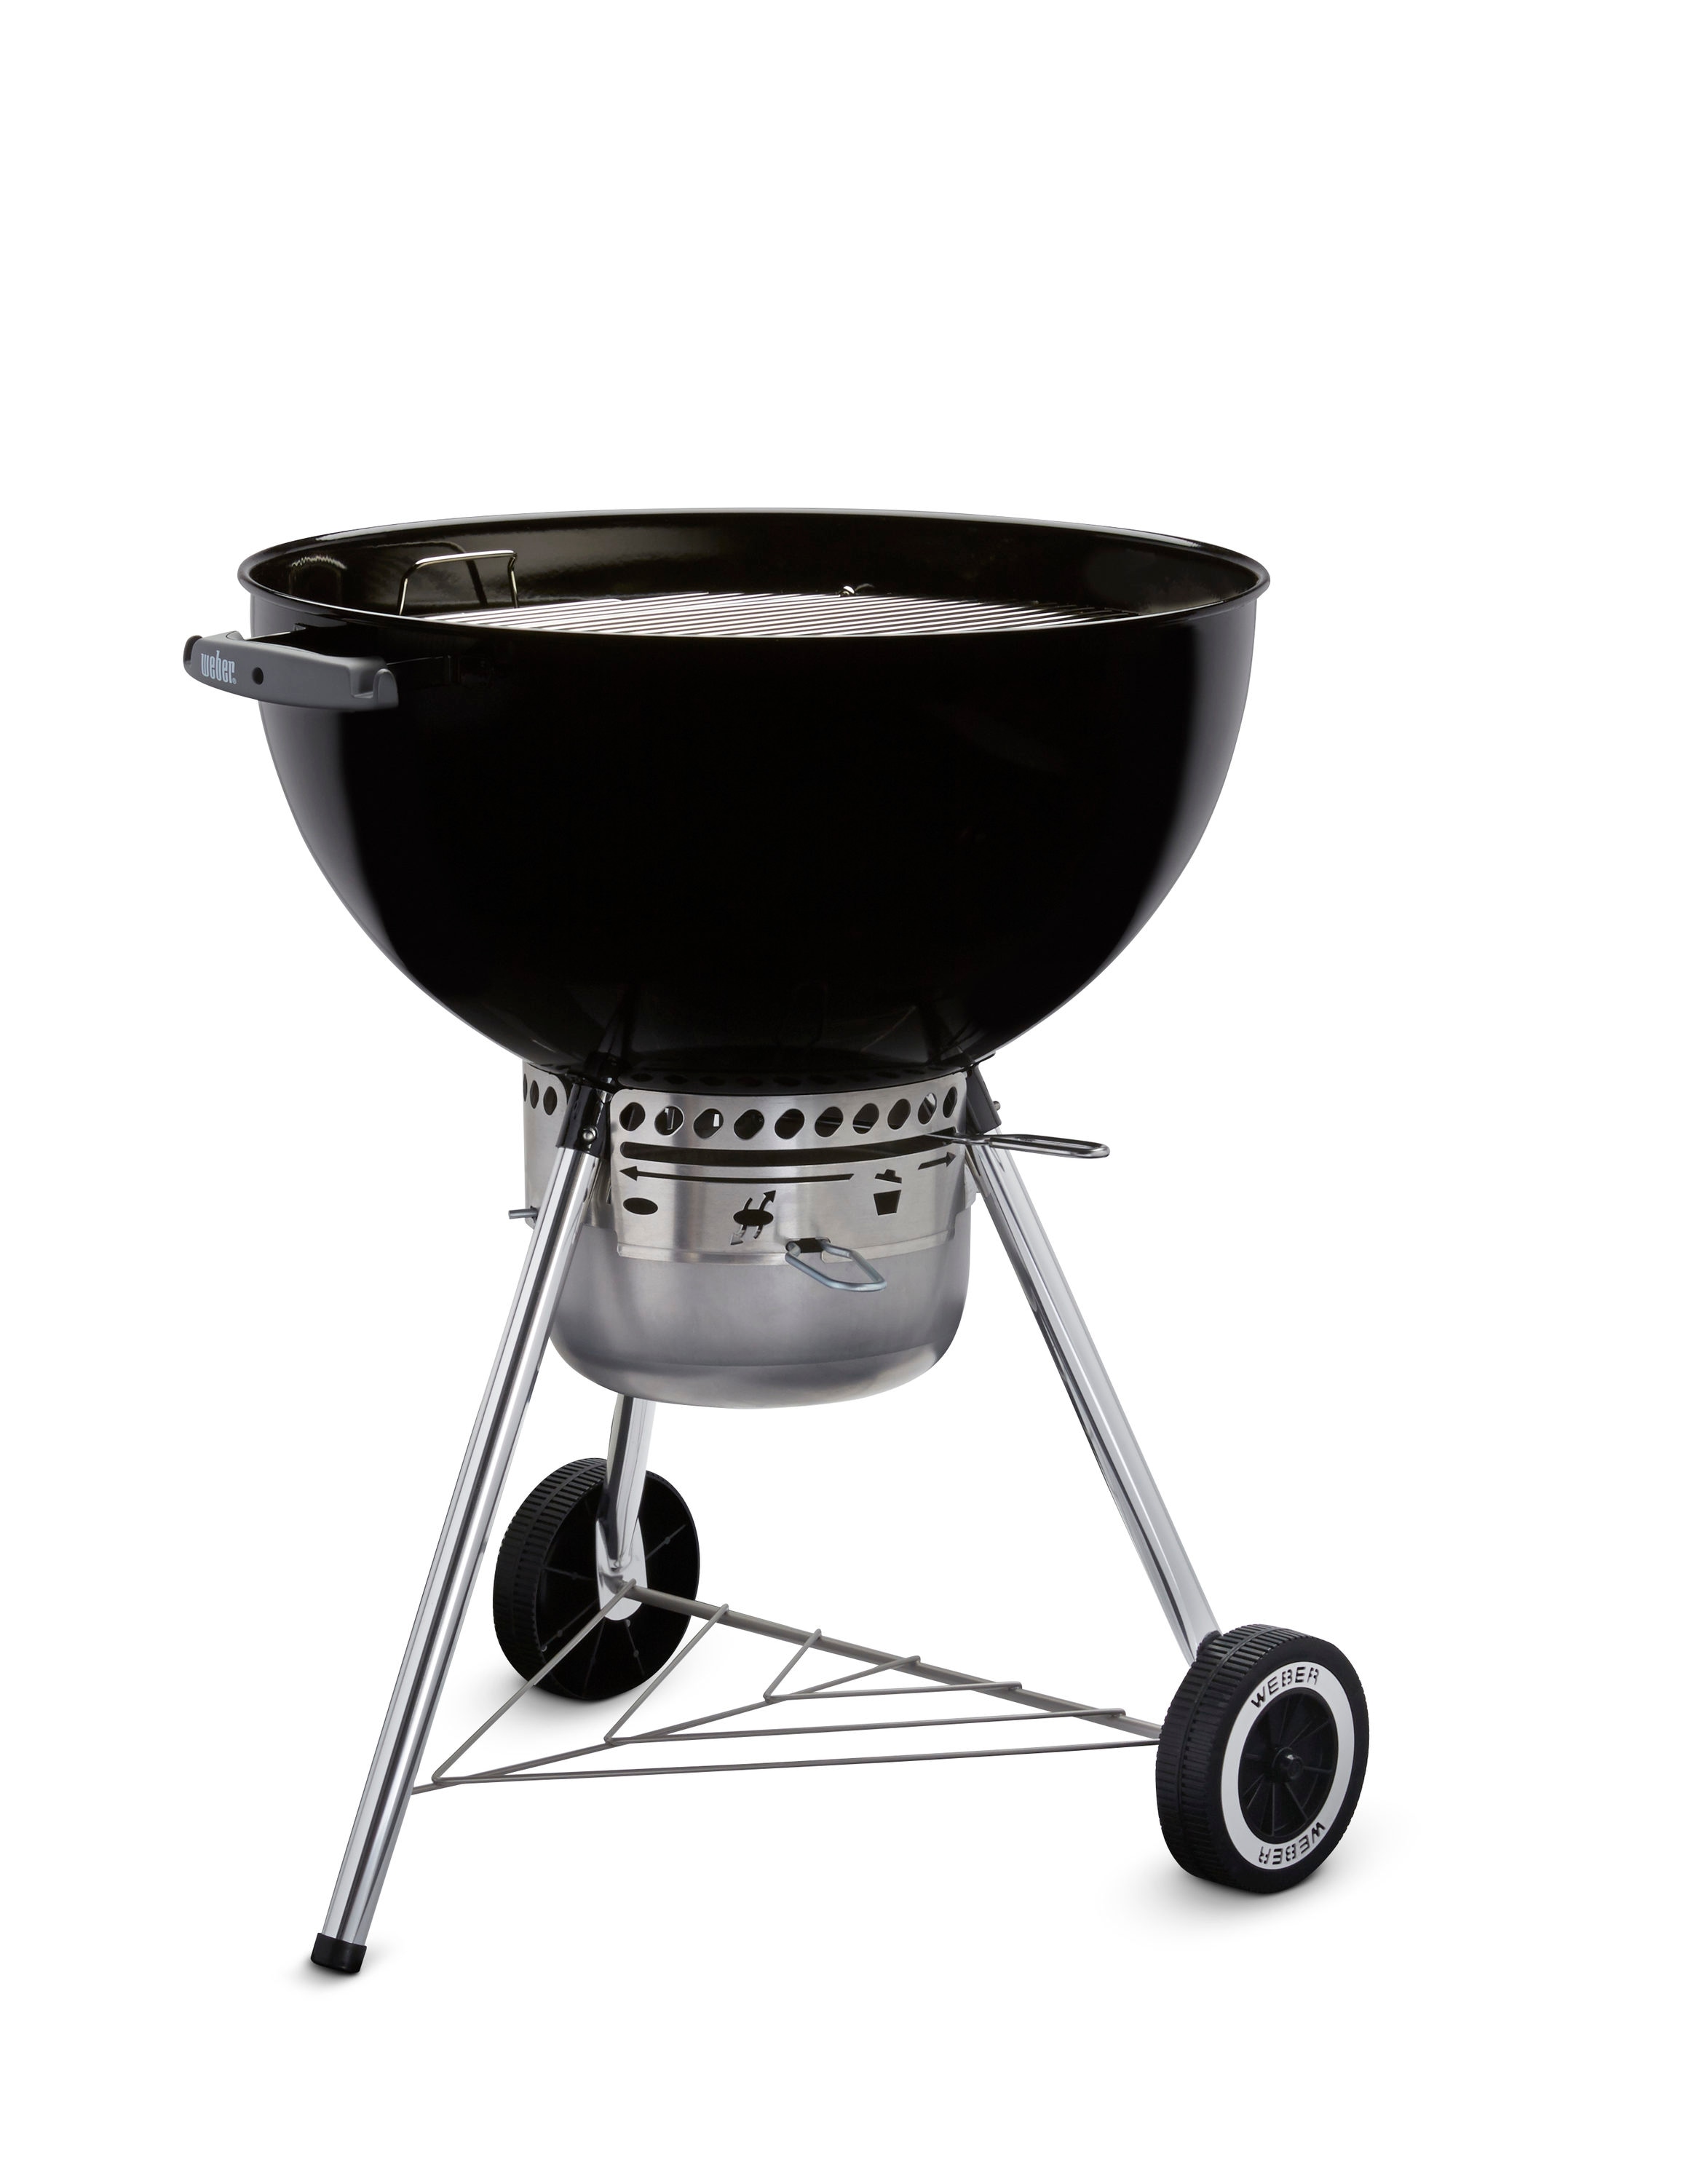 Weber Kettle Premium 22-in Black Kettle Charcoal Grill in Grills department at Lowes.com